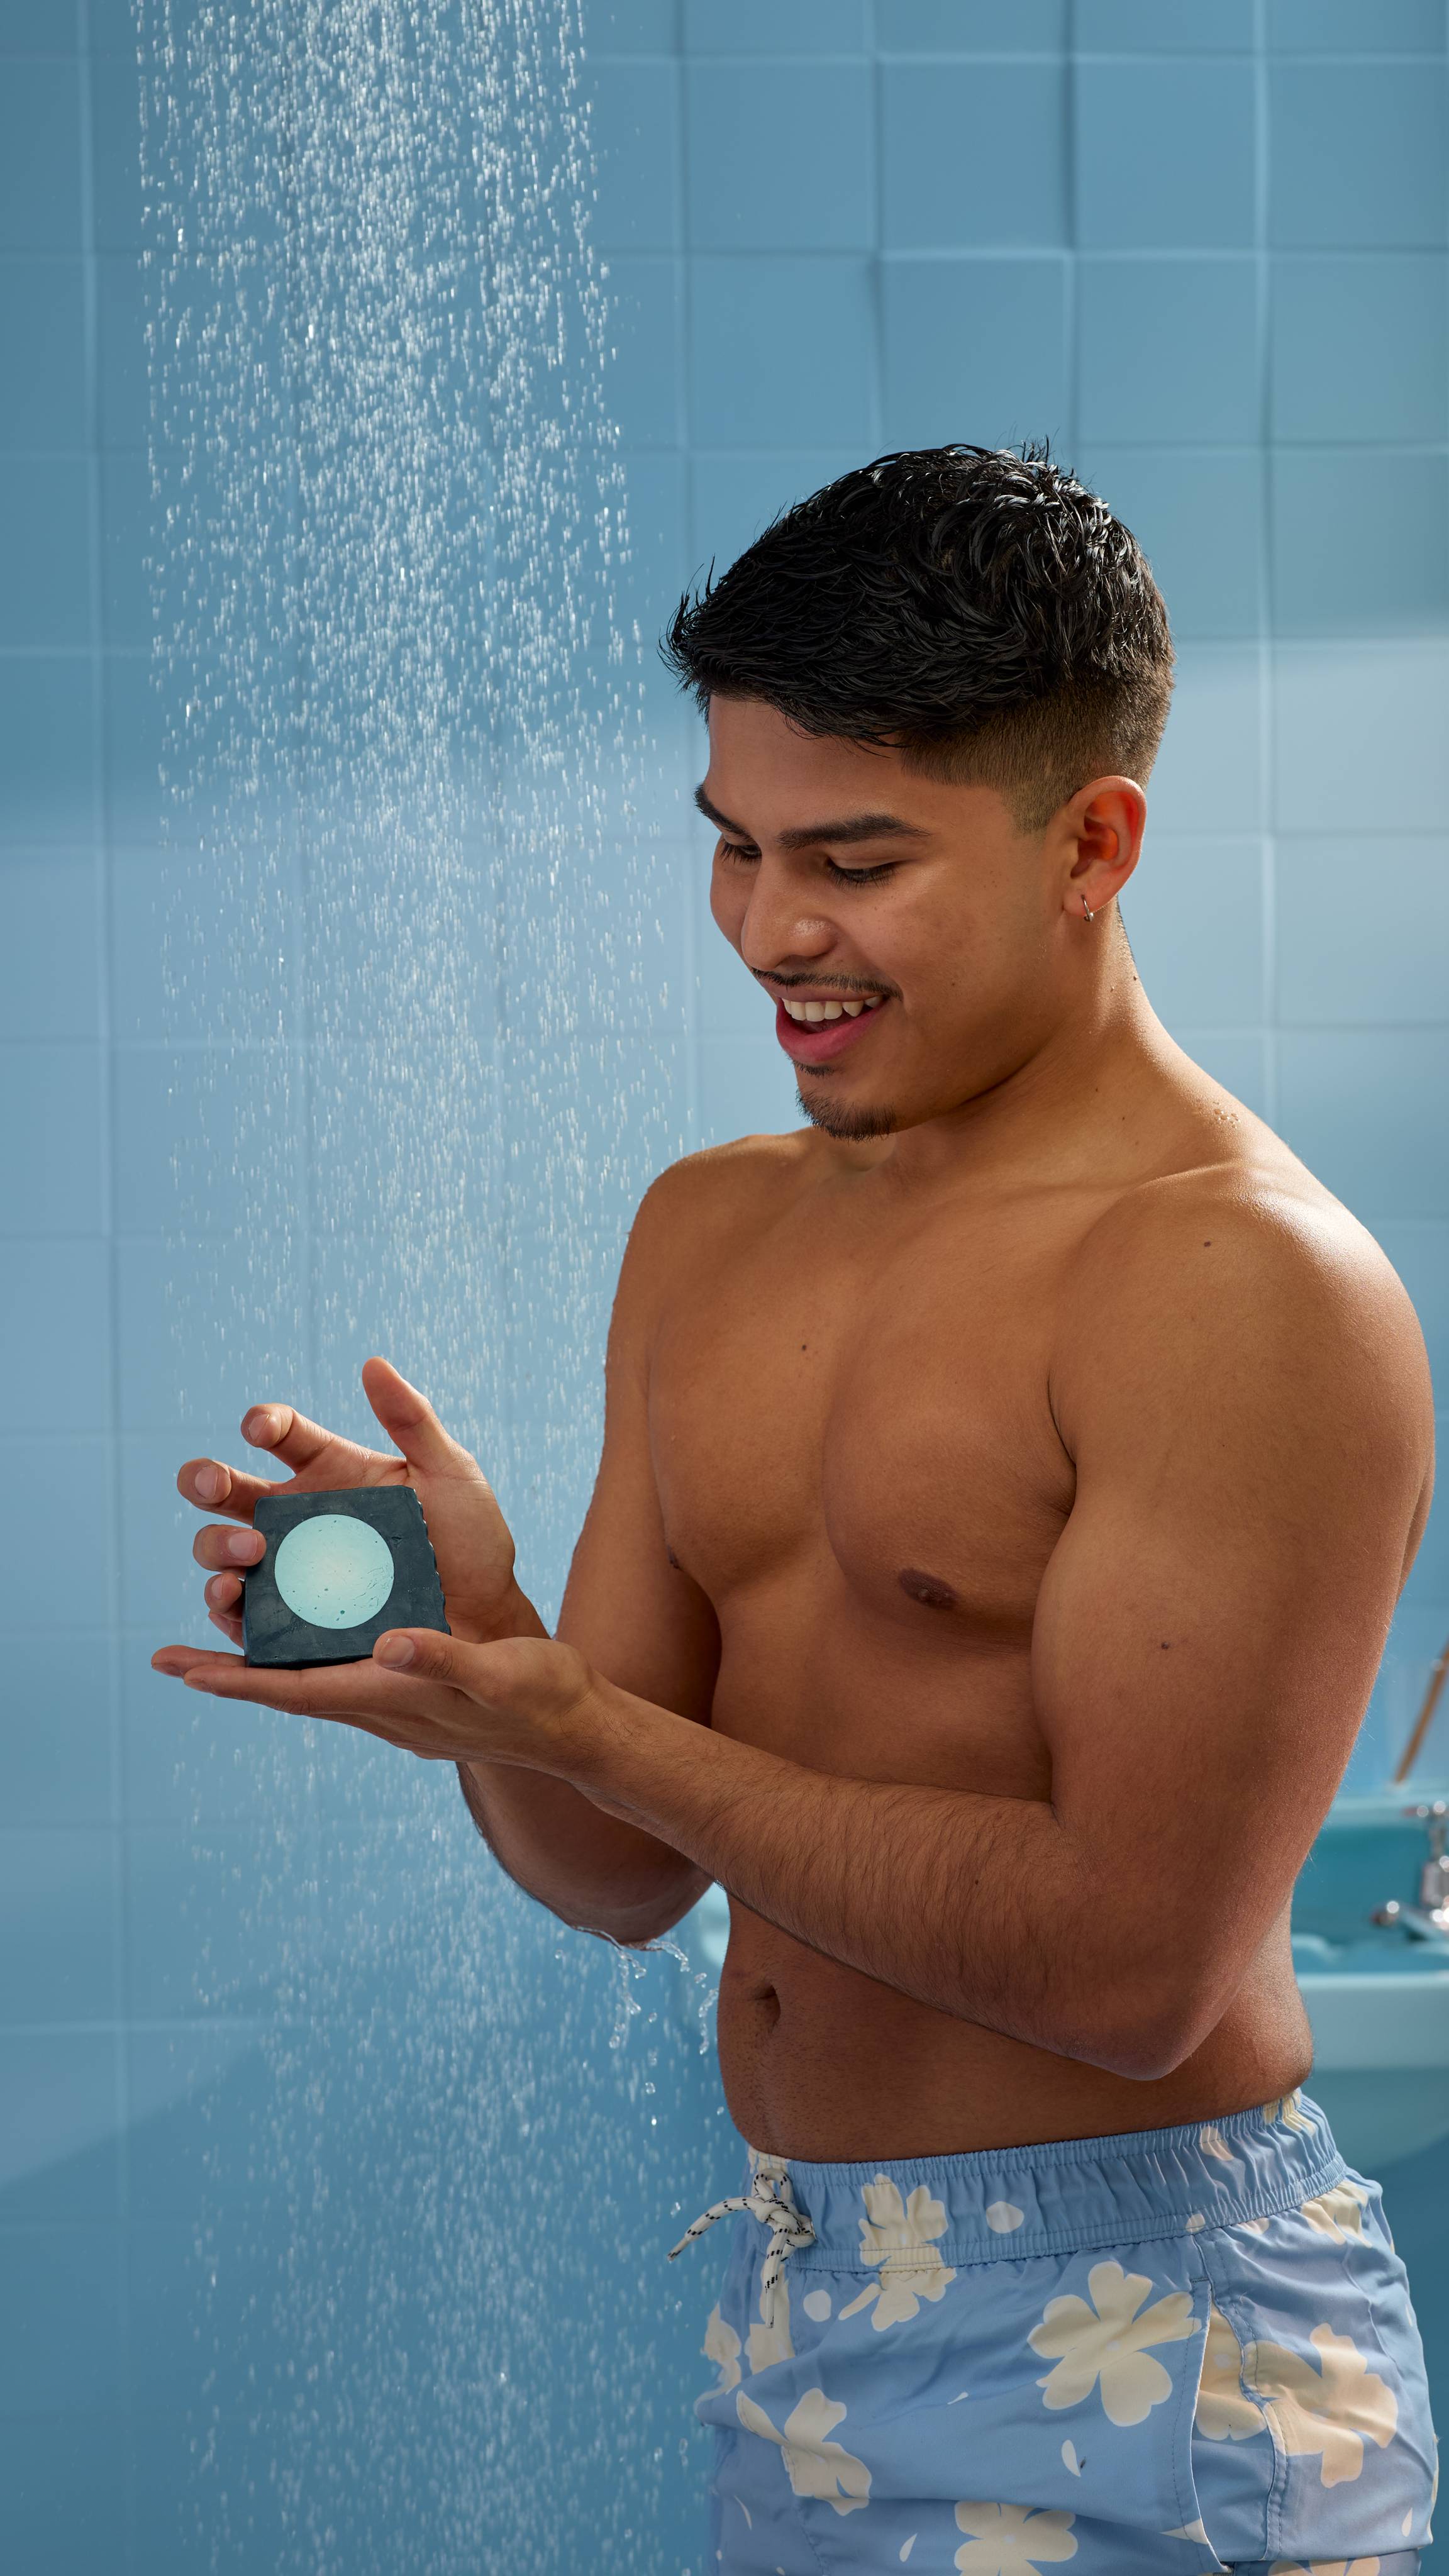 The model is in the shower in a blue, tiled bathroom. They are in blue and white shorts holding the Blue Moon soap with both hands and water falls behind them. 